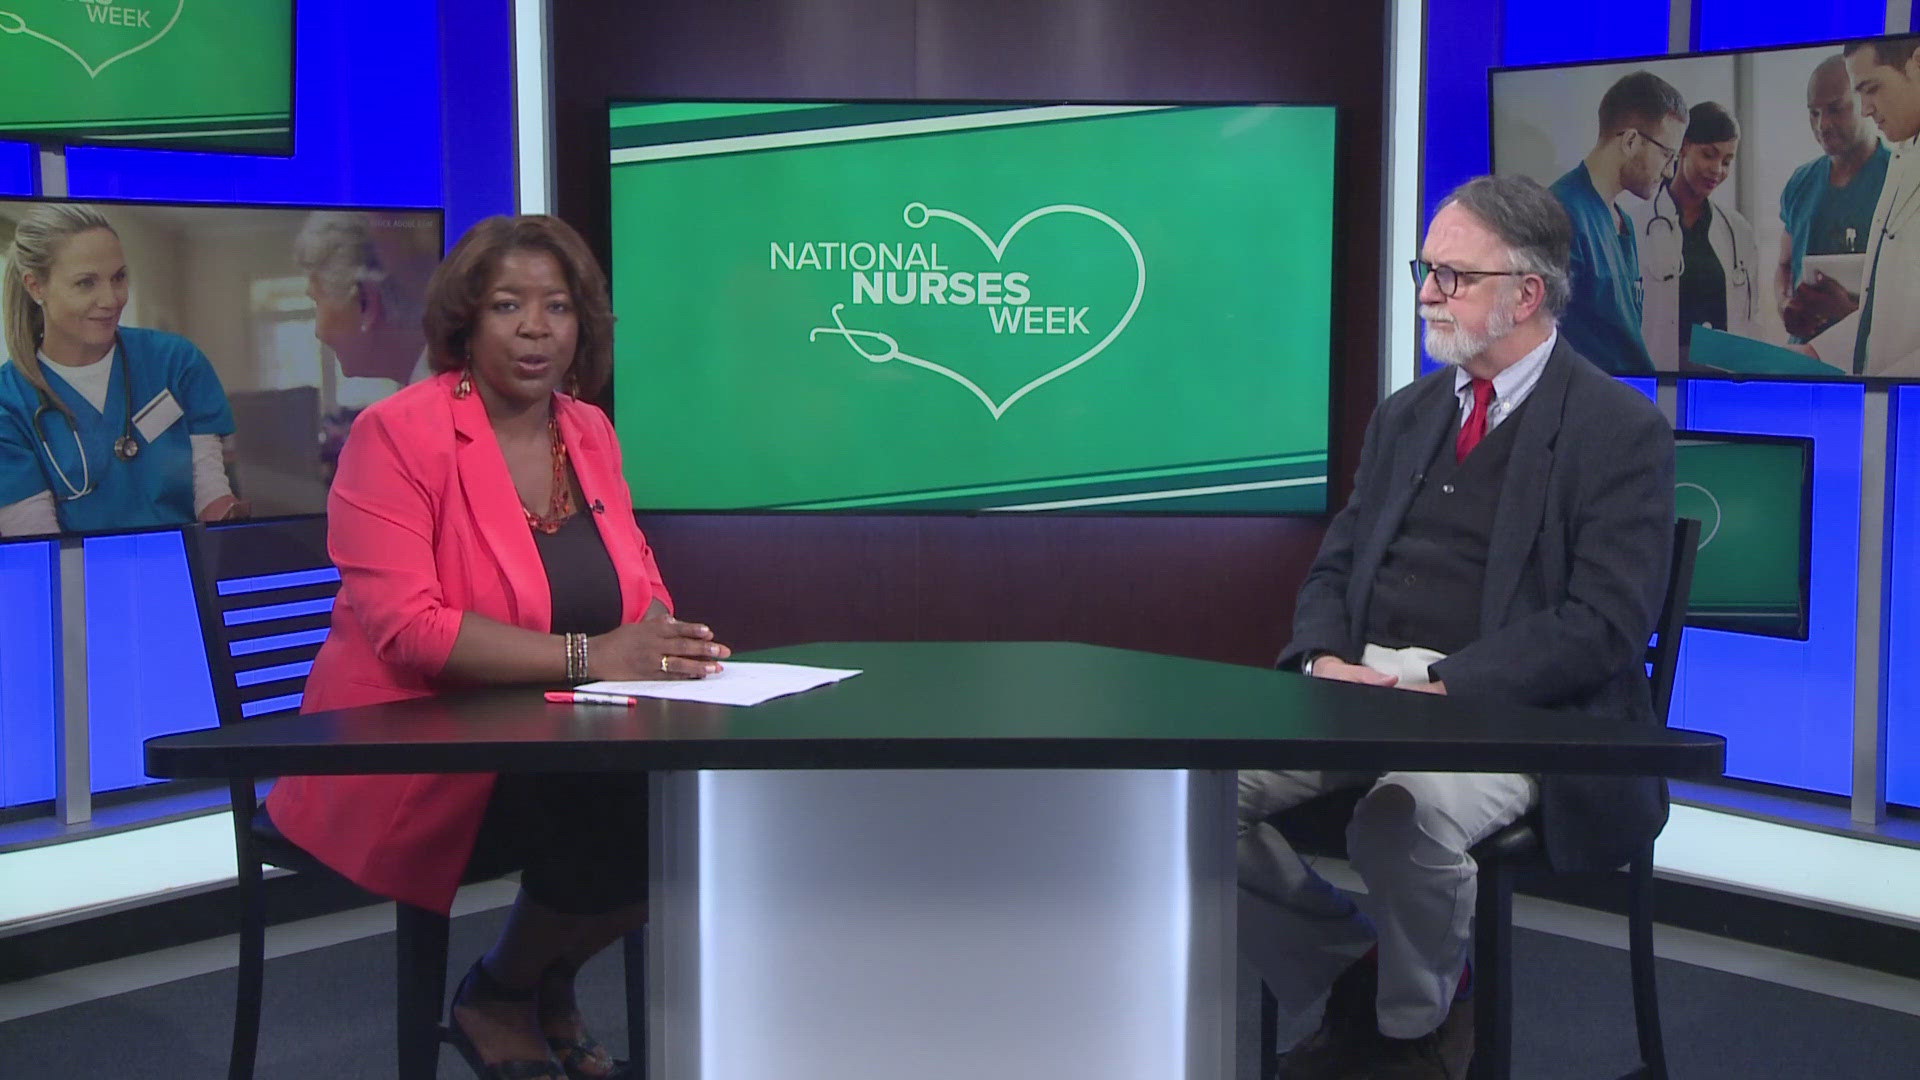 Dr. Richard Guertin, the nursing program director at Bryant & Stratton College, joined Claudine Ewing to discuss National Nurses Week.